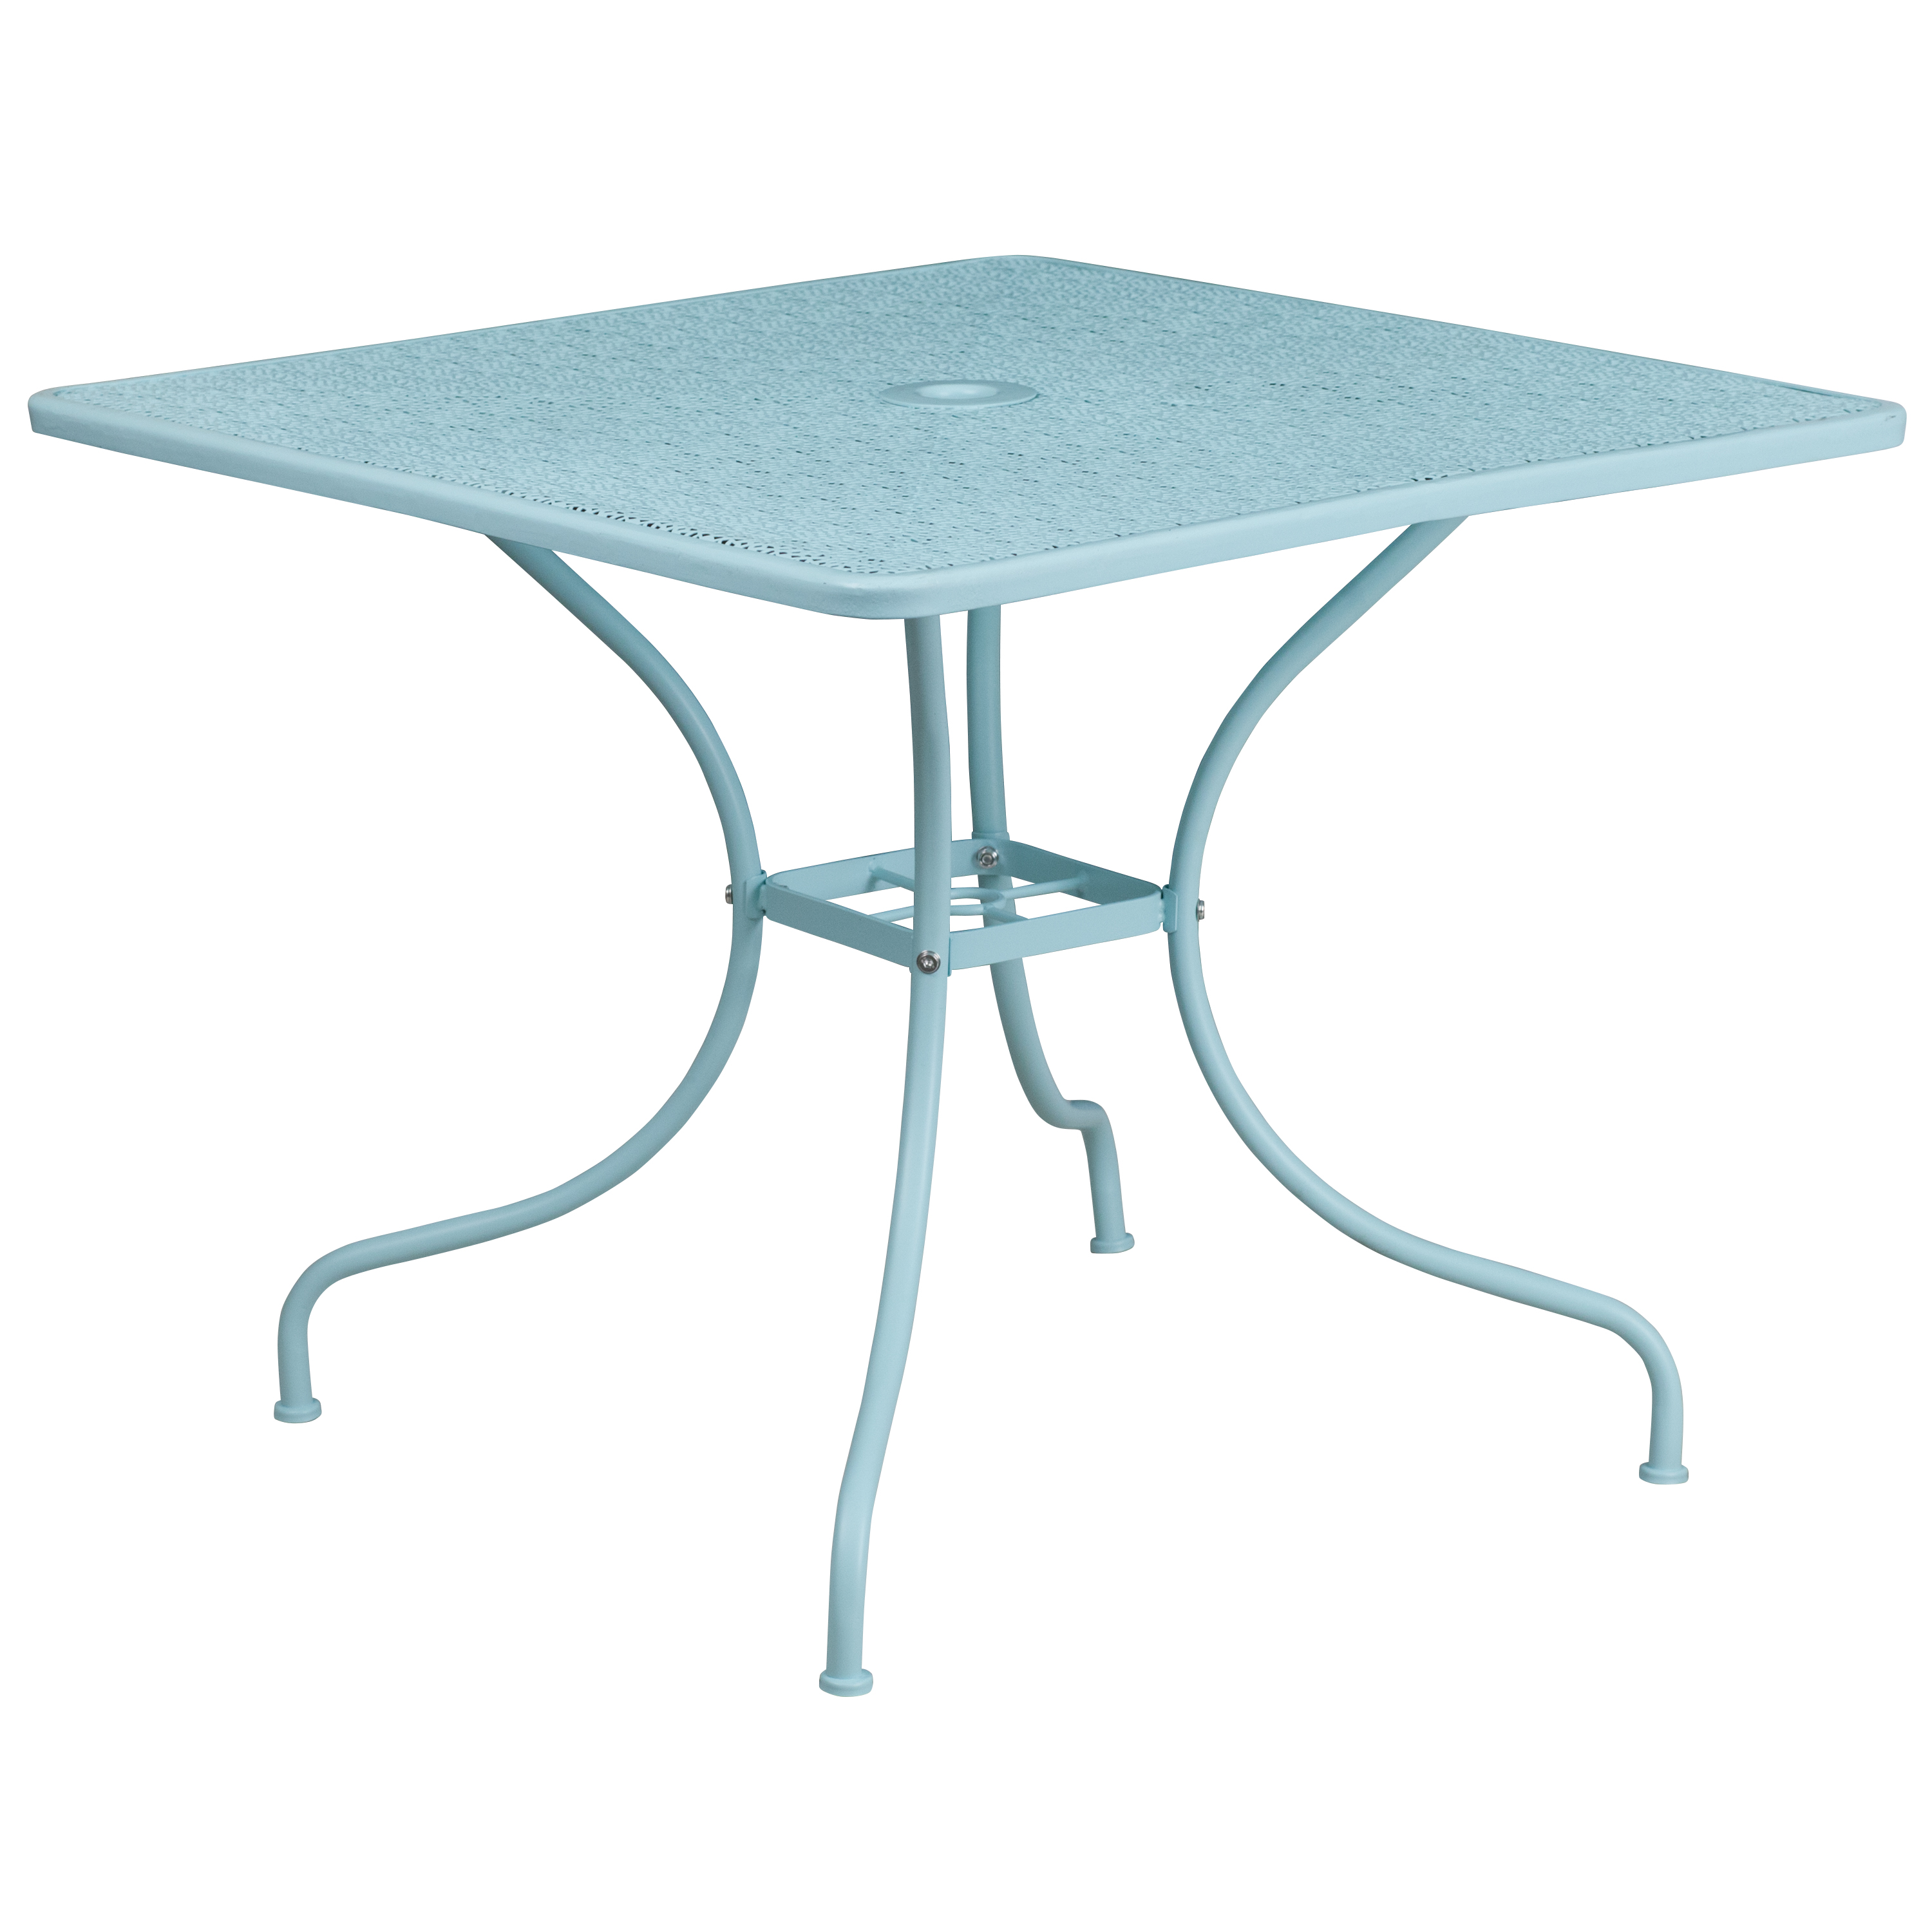 Flash Furniture Oia Commercial Grade 35.5" Square Sky Blue Indoor-Outdoor Steel Patio Table Set with 4 Square Back Chairs - image 4 of 5